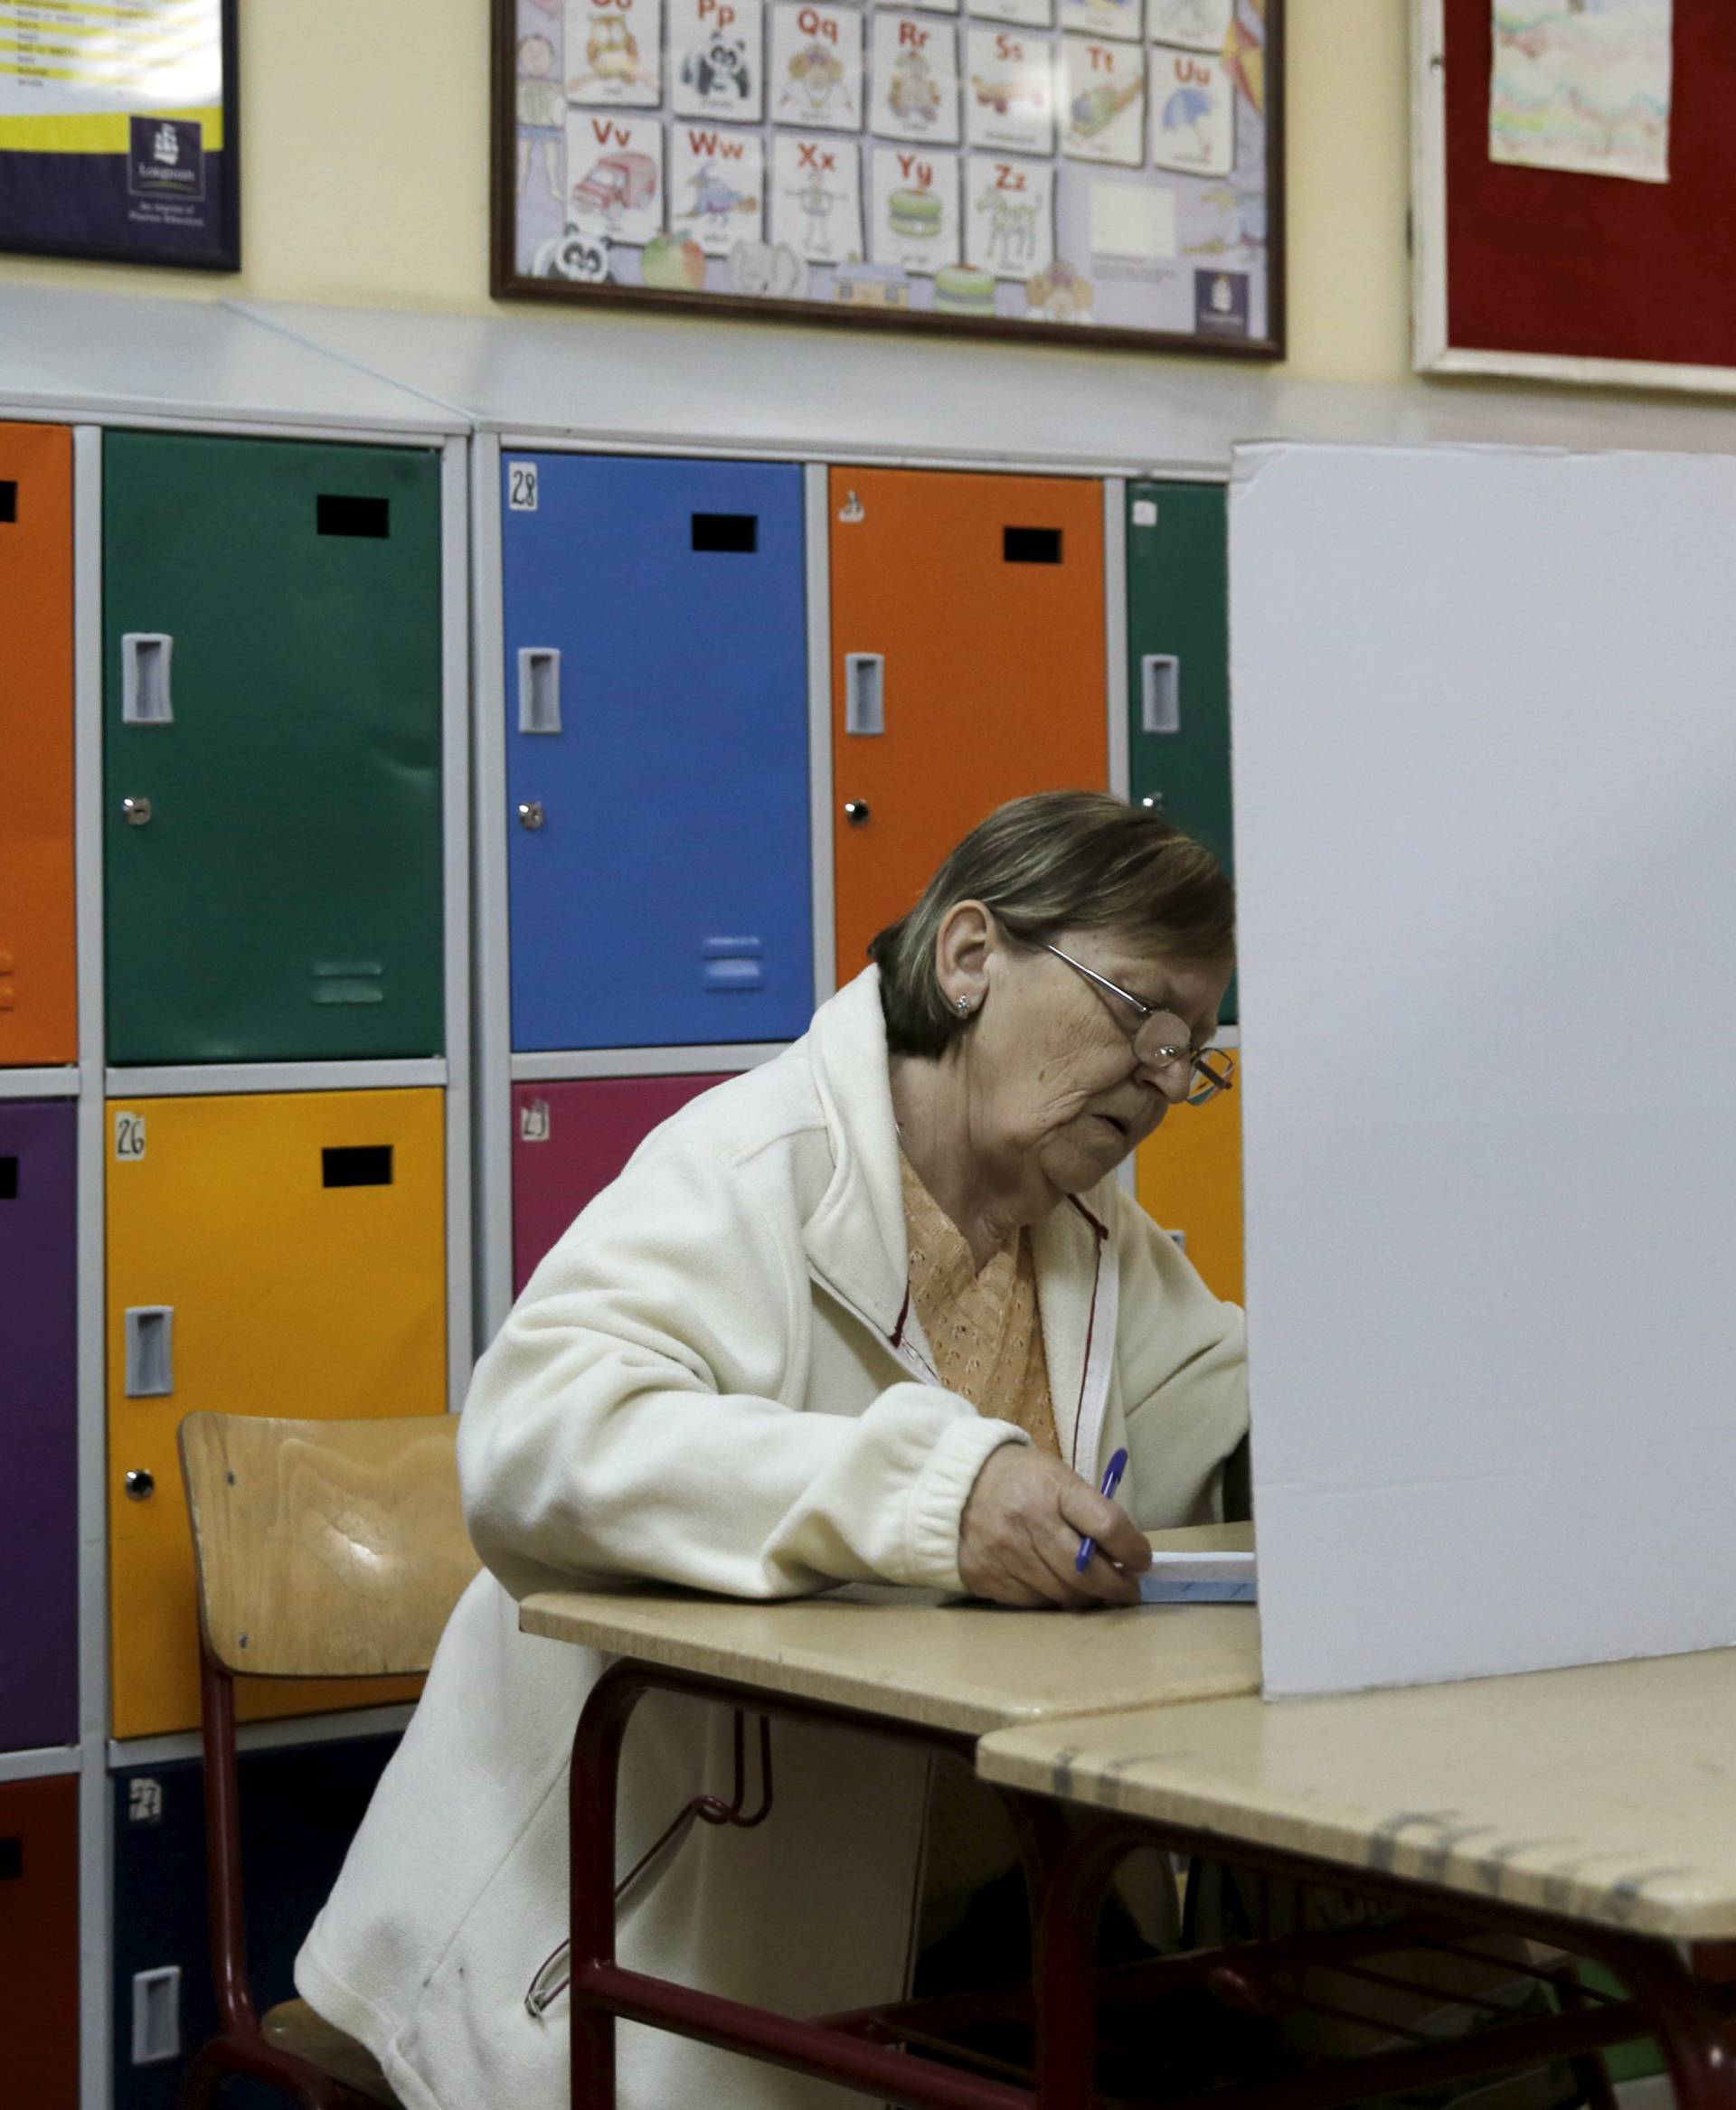 A woman casts her vote at a polling station during elections in Belgrade